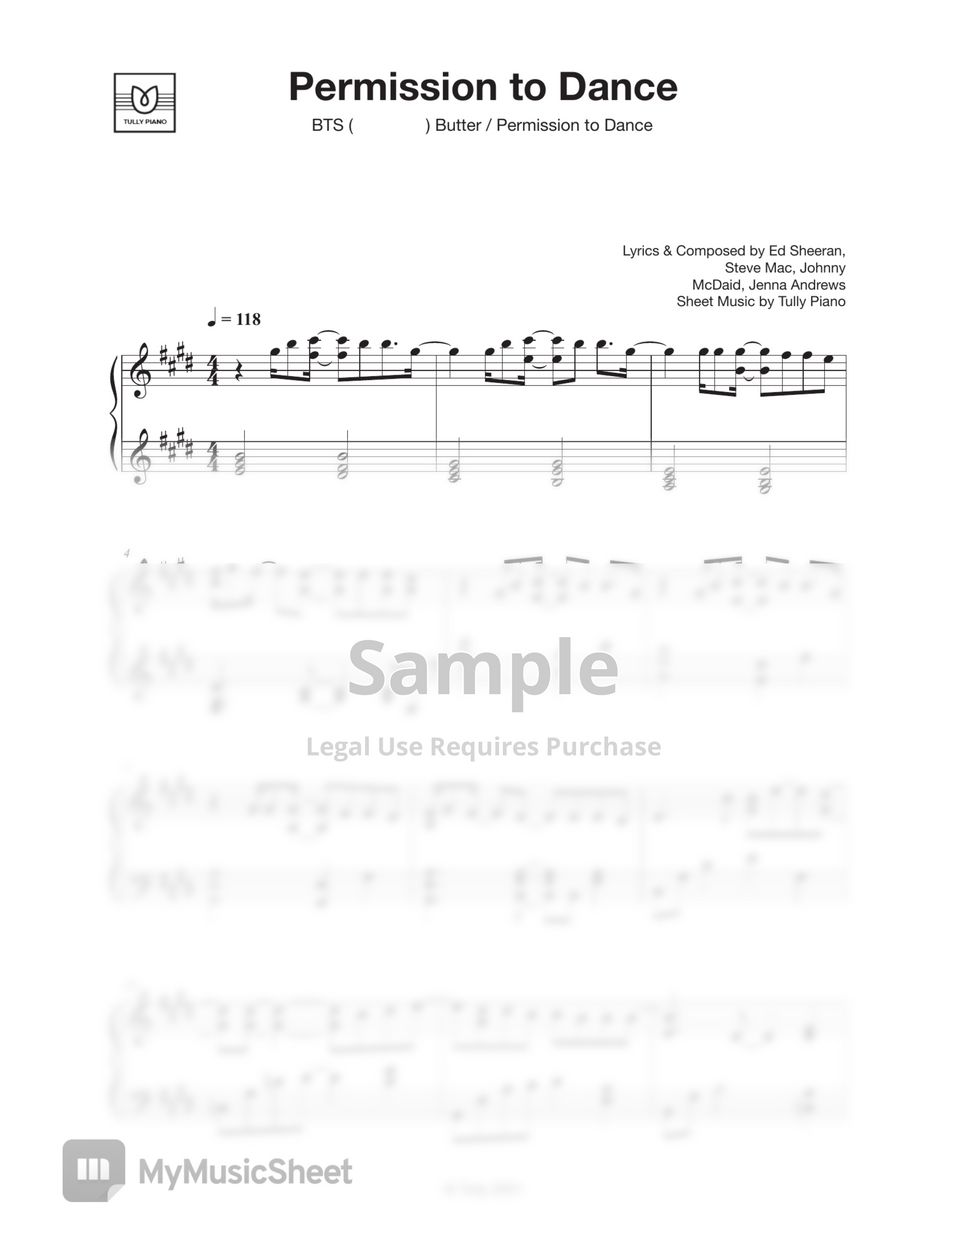 BTS(방탄소년단) - Permission to Dance (2 Sheets) by Tully Piano